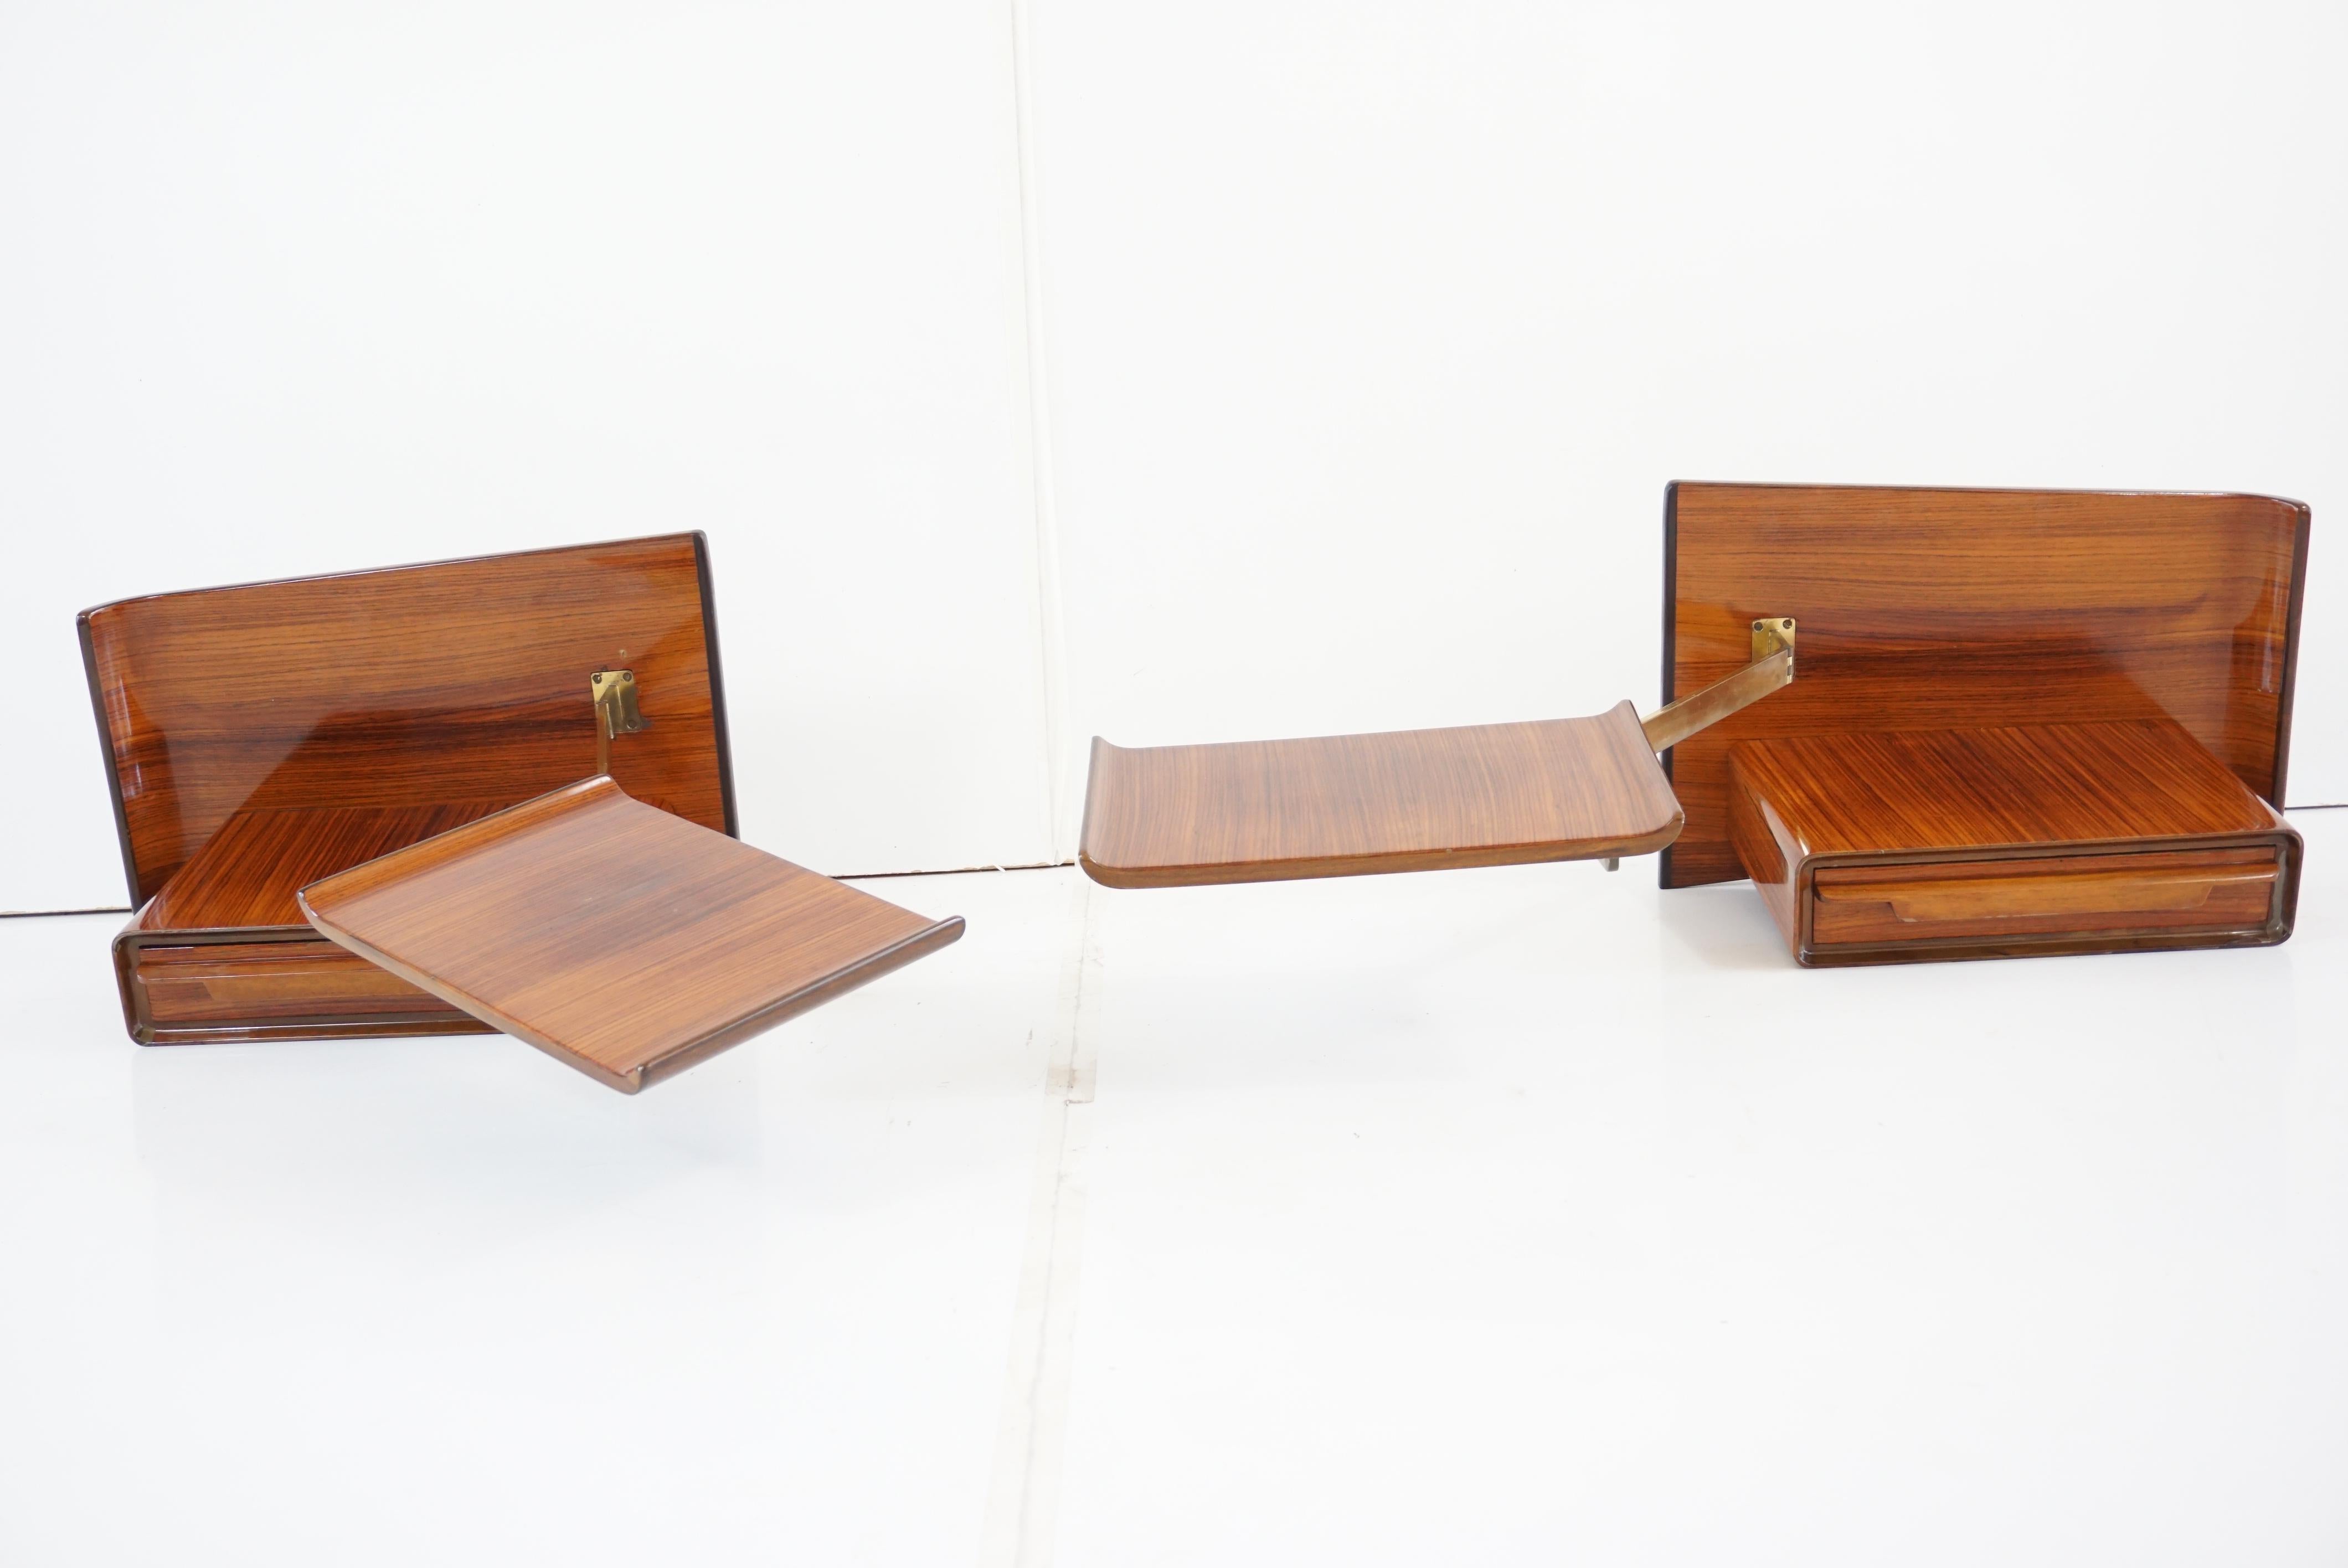 Mid-20th Century Pair of Unique Rosewood Hanging Cavatorta Bedside Tables, Adjustable Shelfs 1950